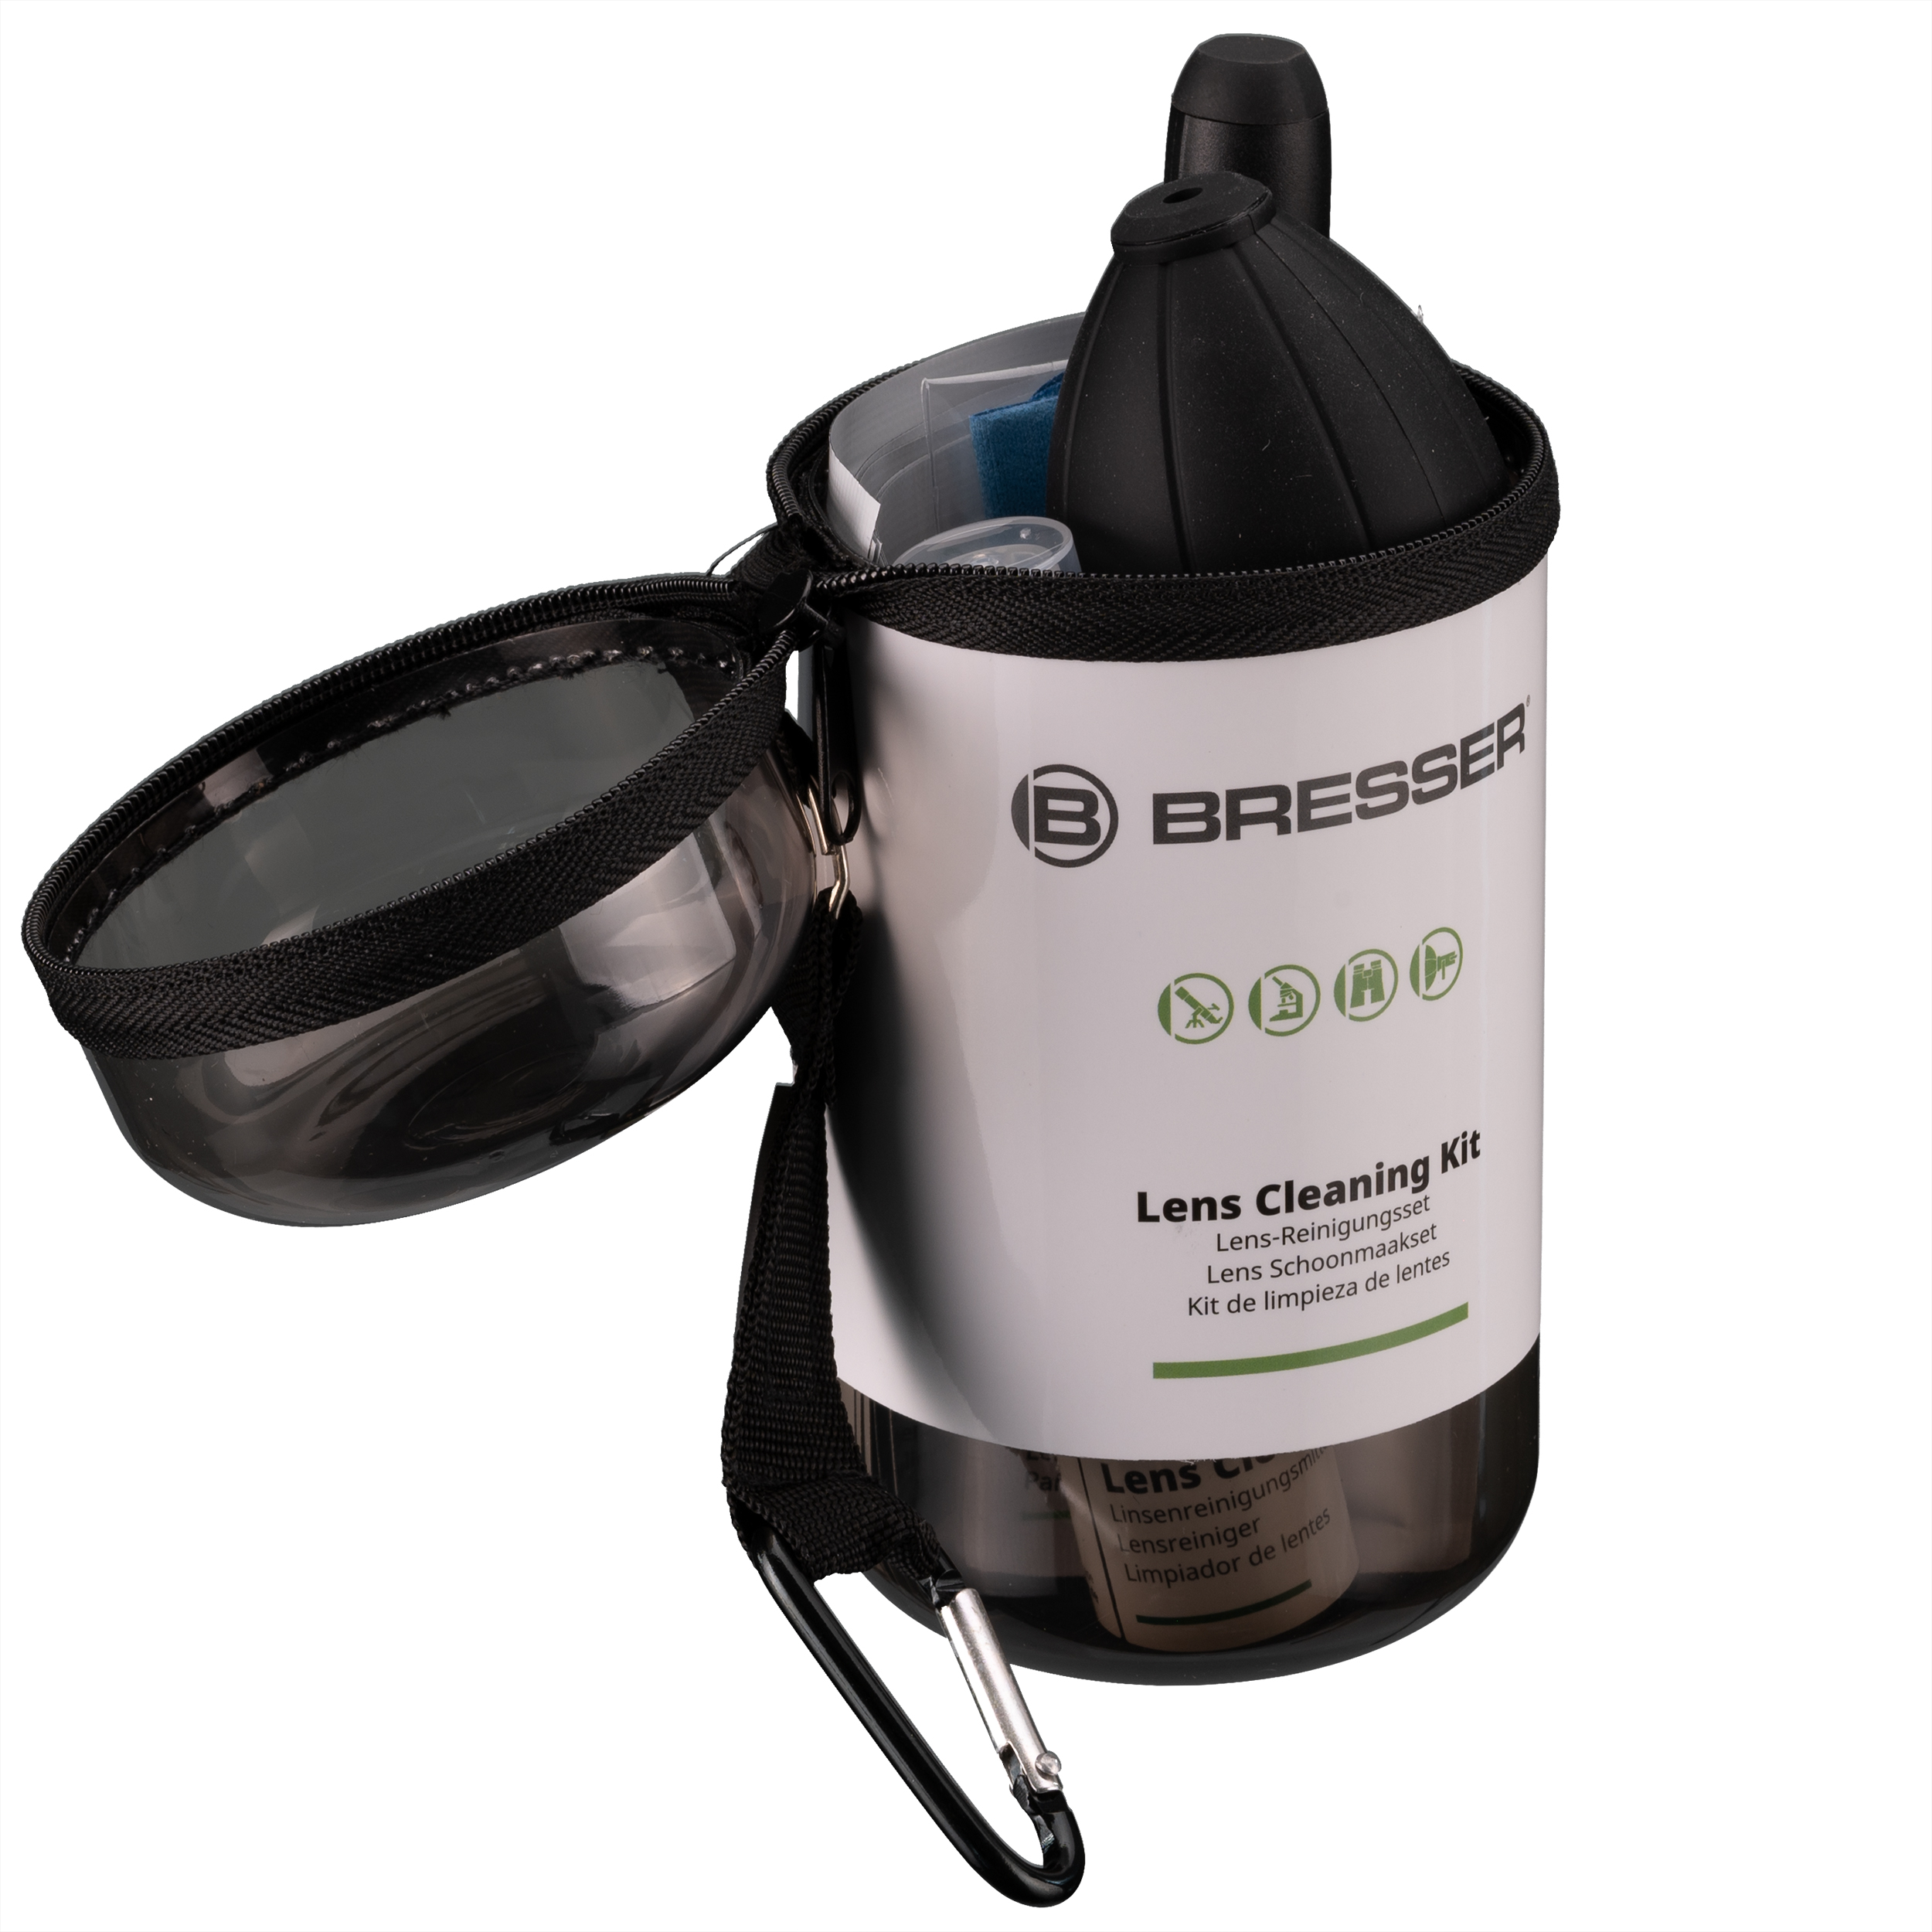 Bresser Camera and Lens Cleaning Kit